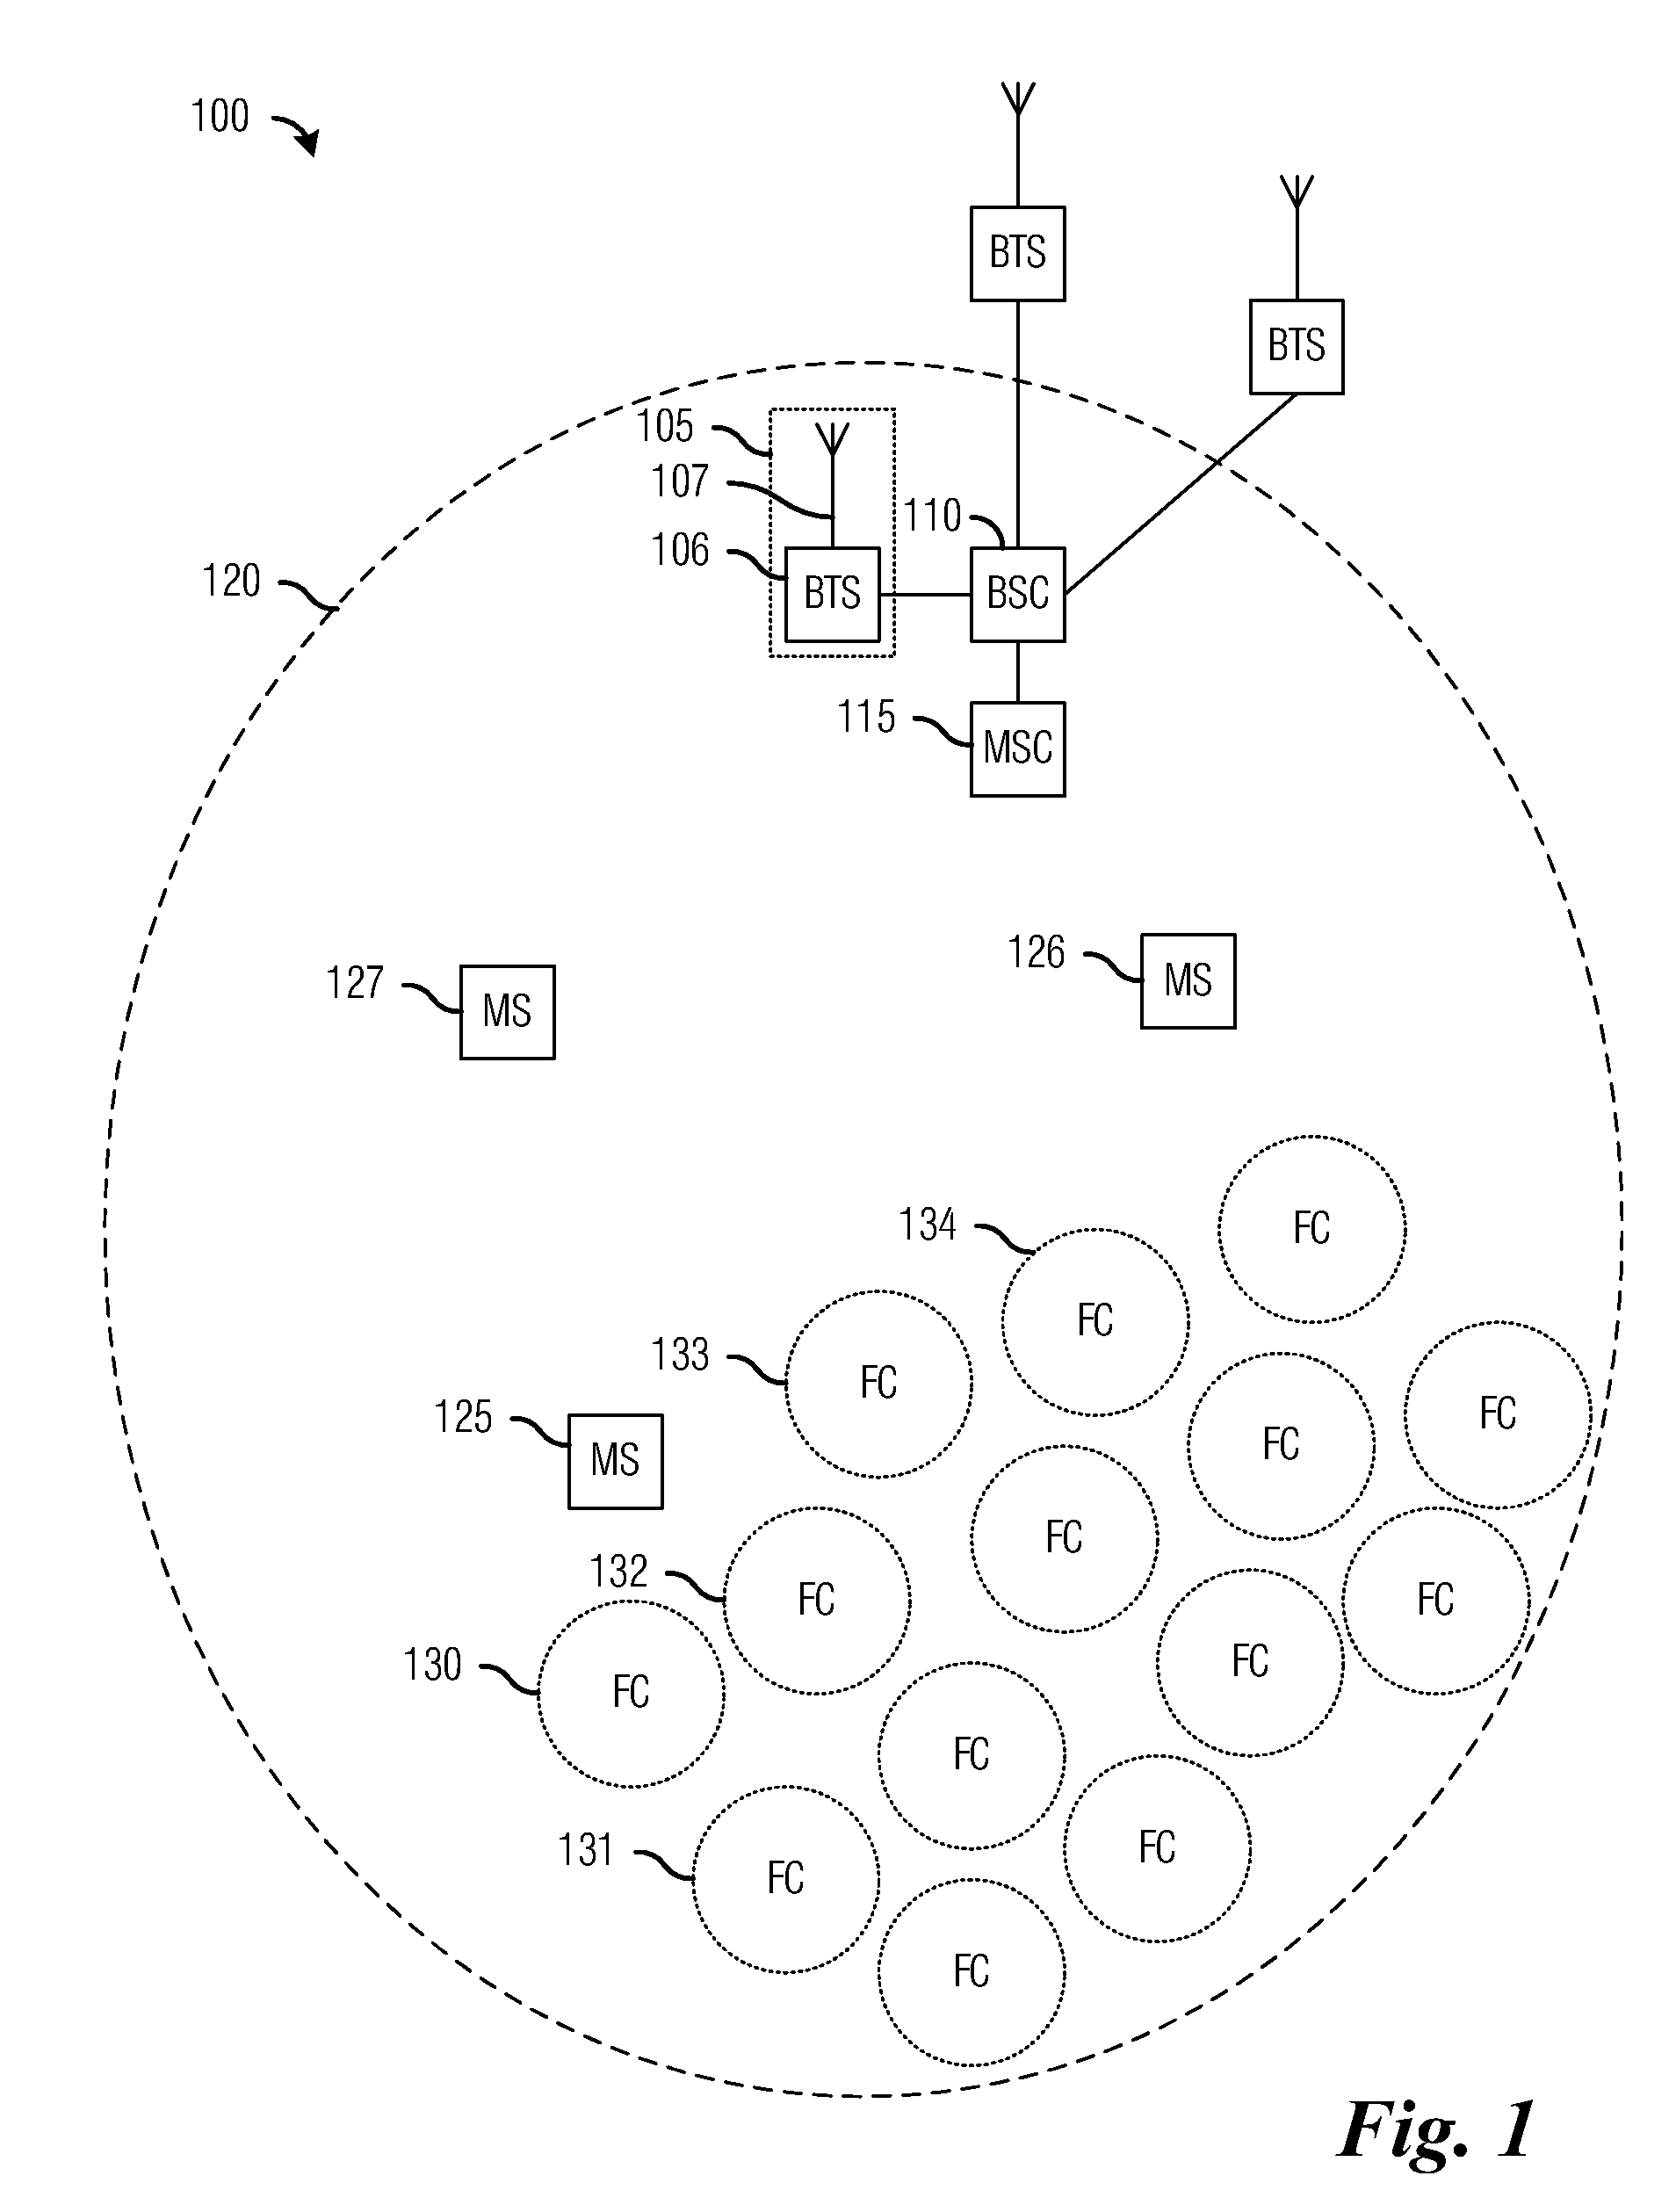 System and Method for Providing Connection Handoffs in Wireless Networks